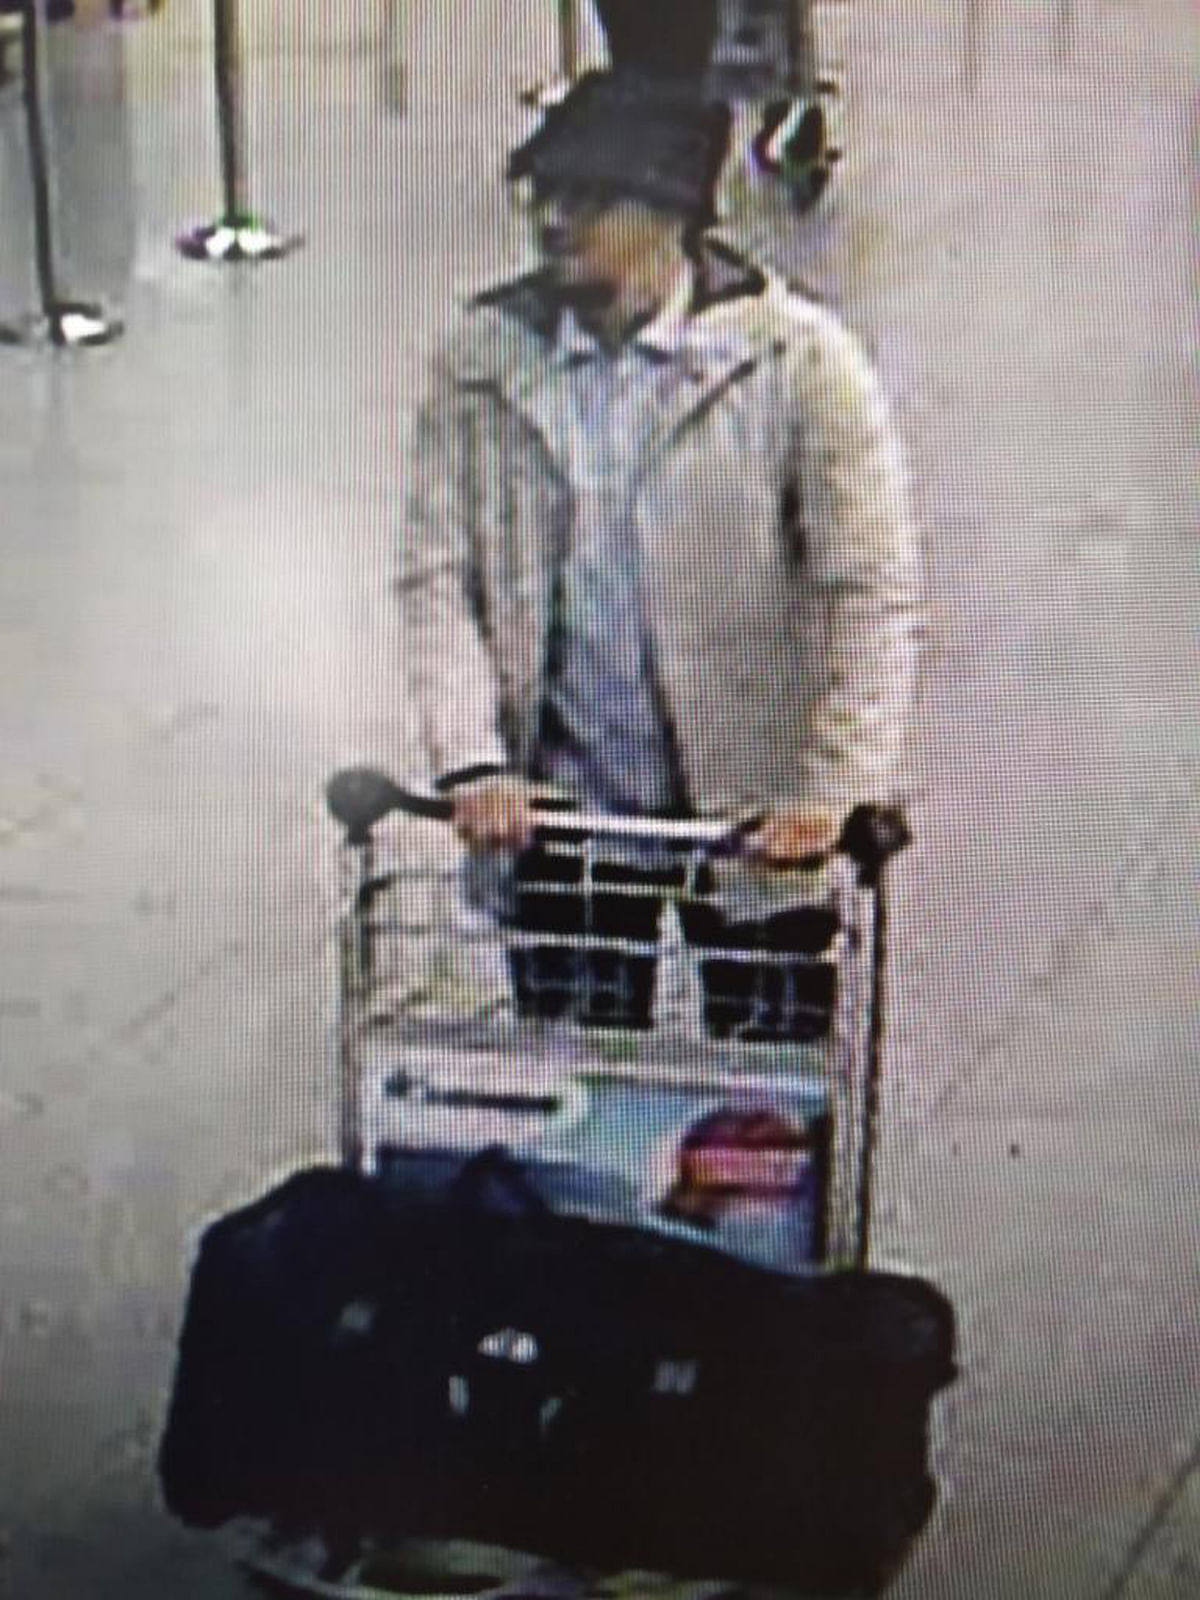 CCTV footage shows three men  who are suspected of taking part in the attacks on Belgium’s Zaventem Airport.